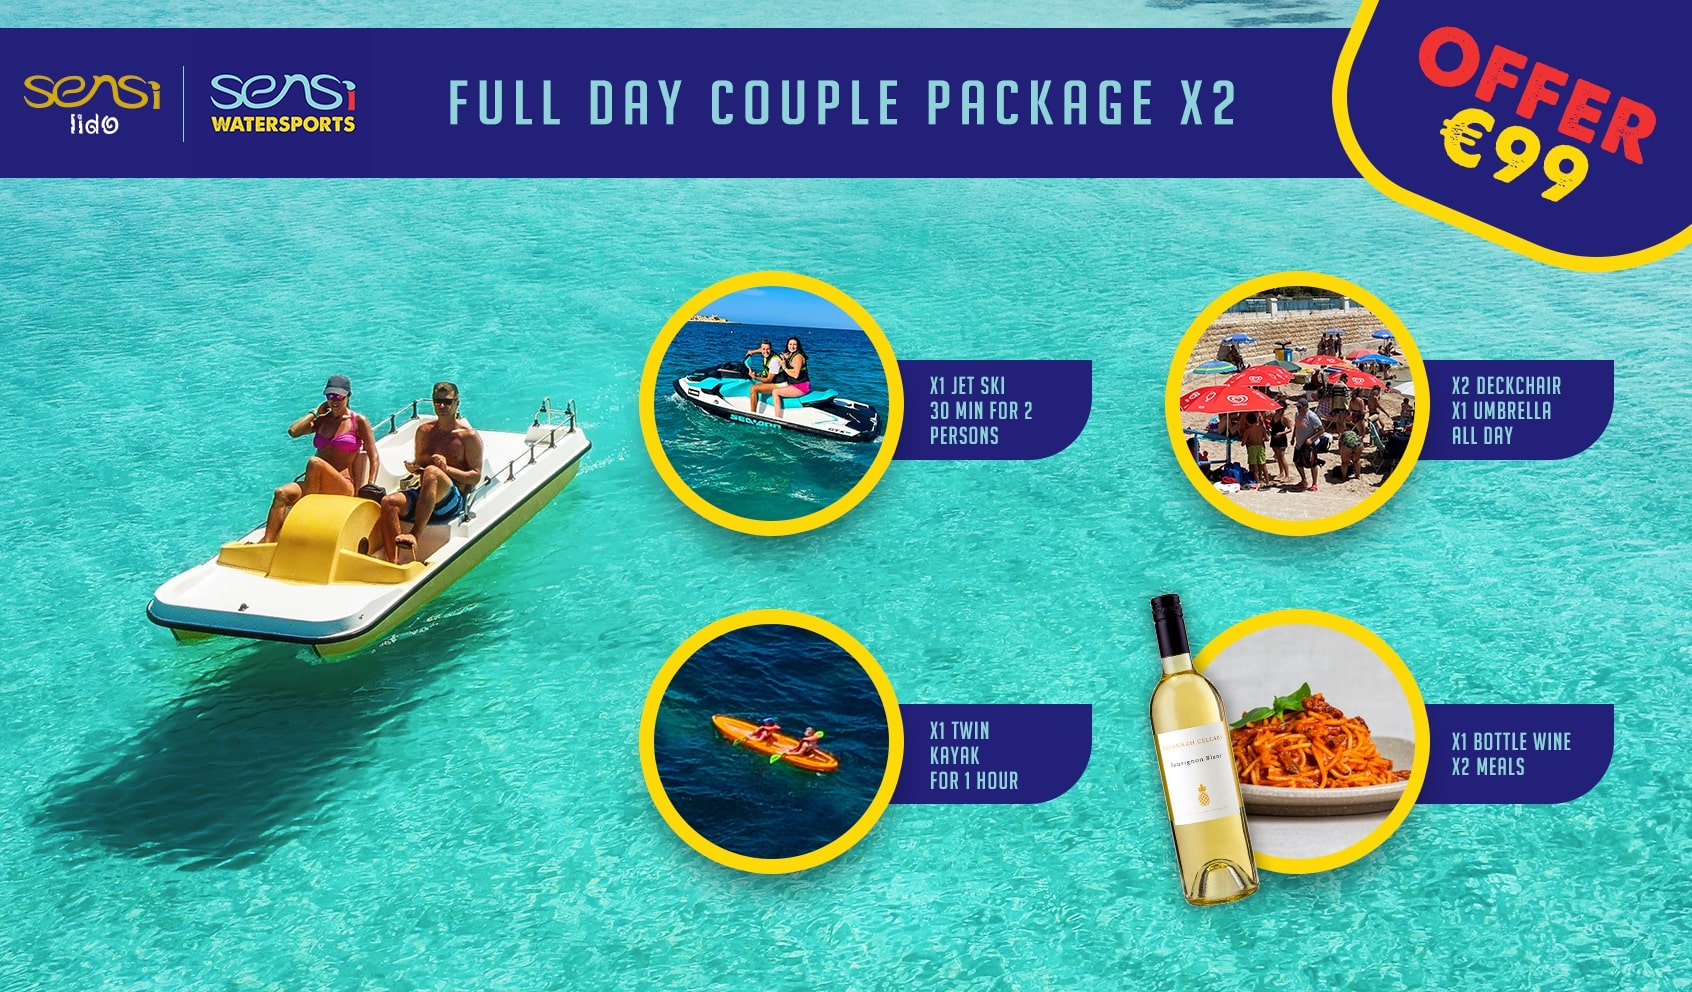 Full-Day-Couple-Package-Deal-x2-99eu